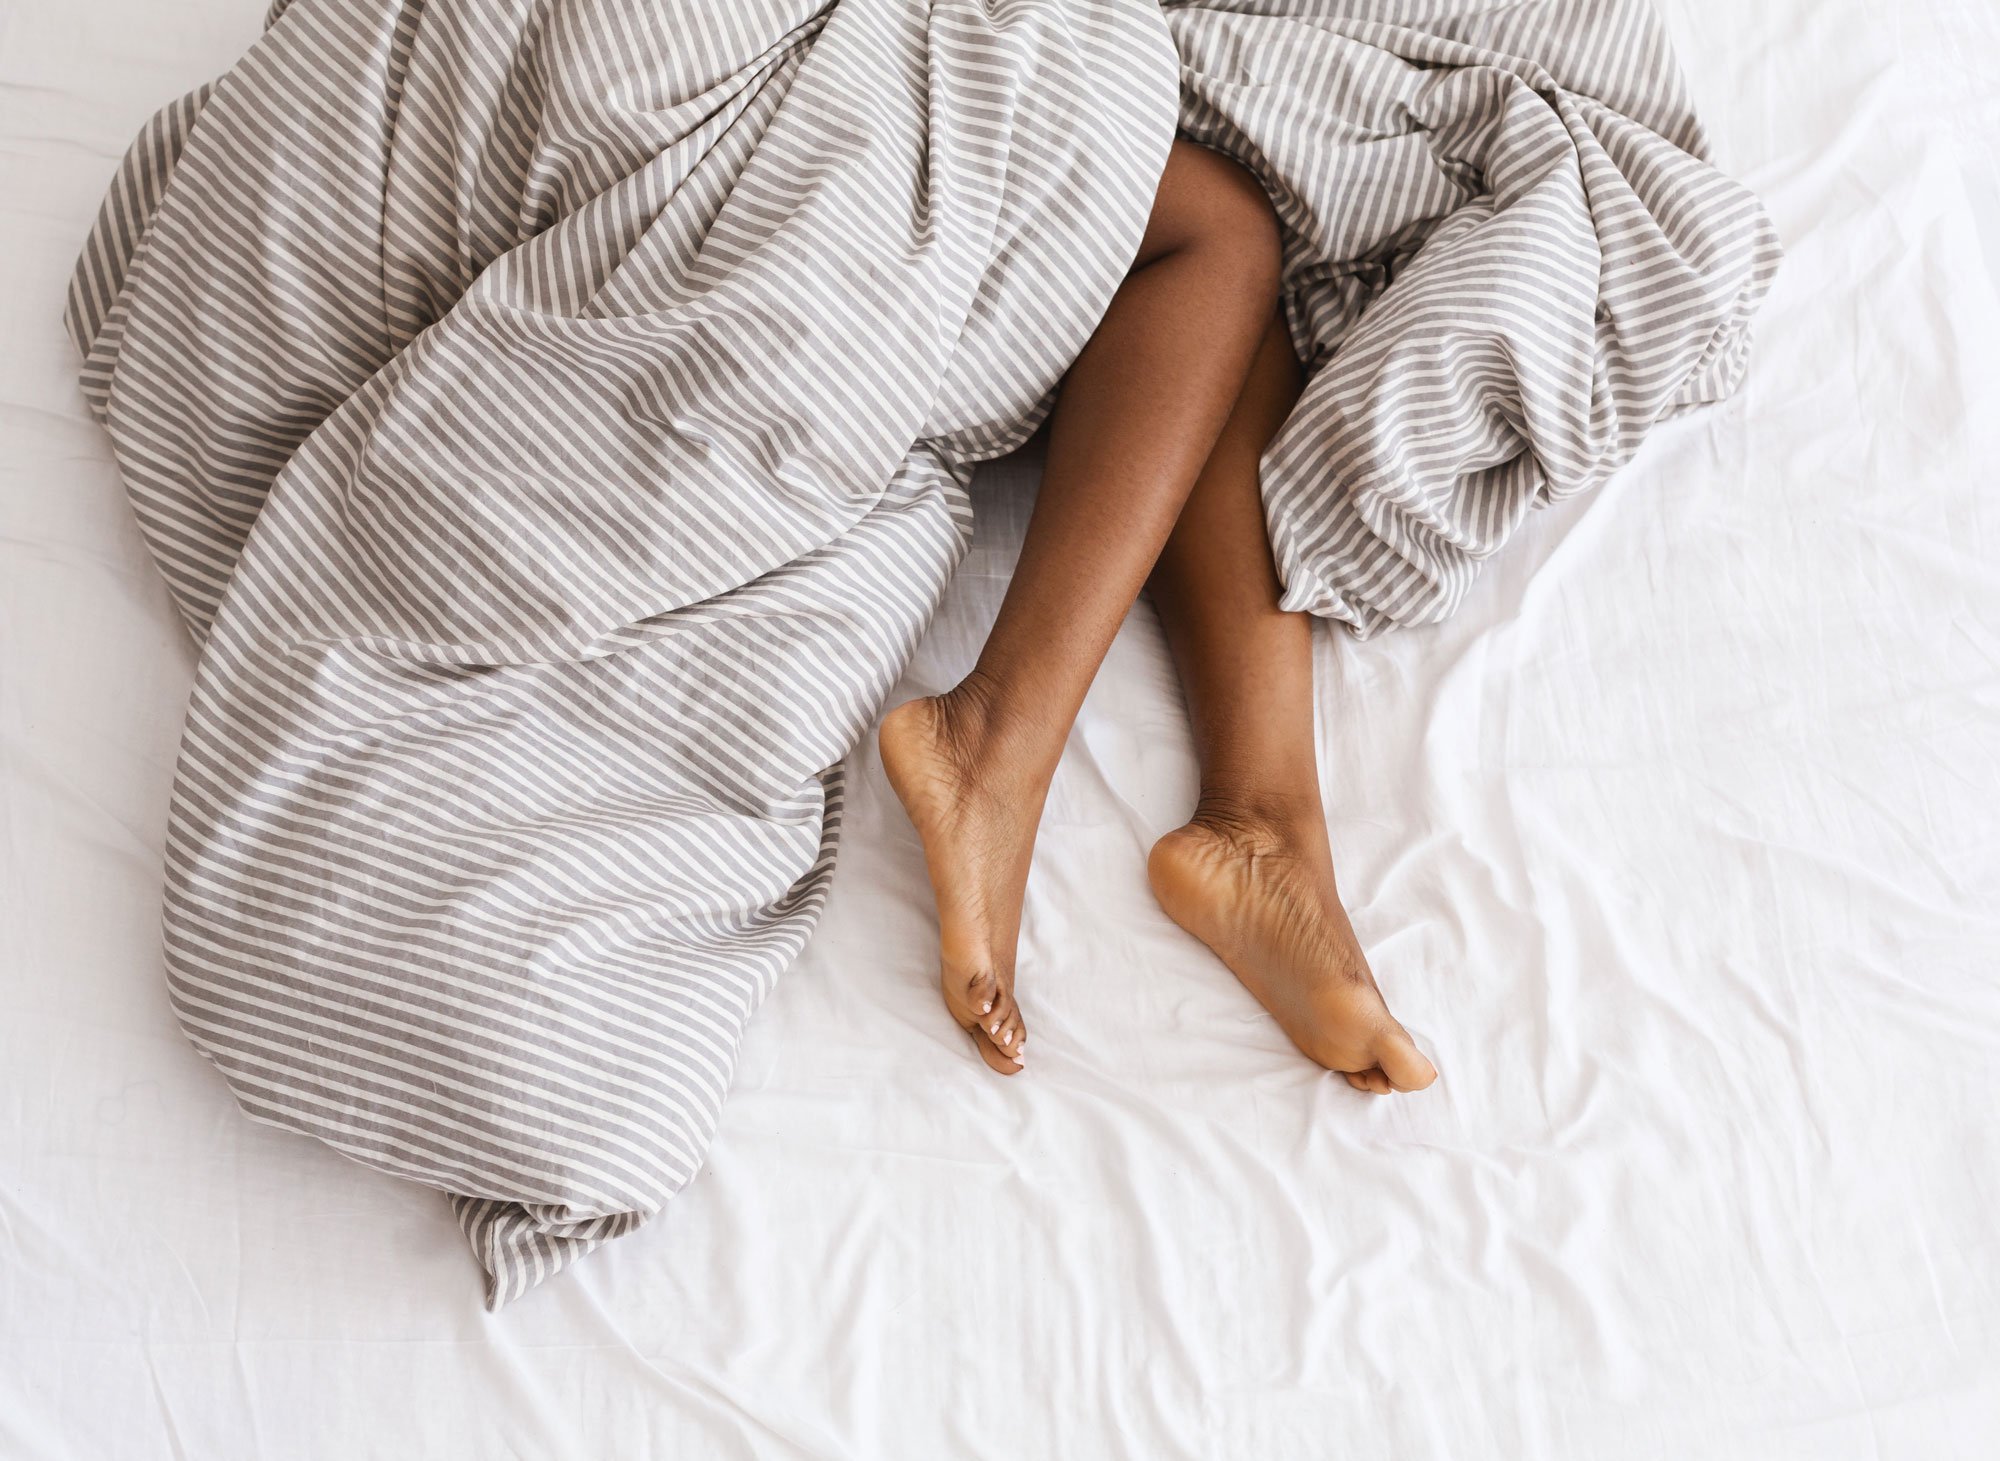 Woman's legs sticking out of sheets on bed